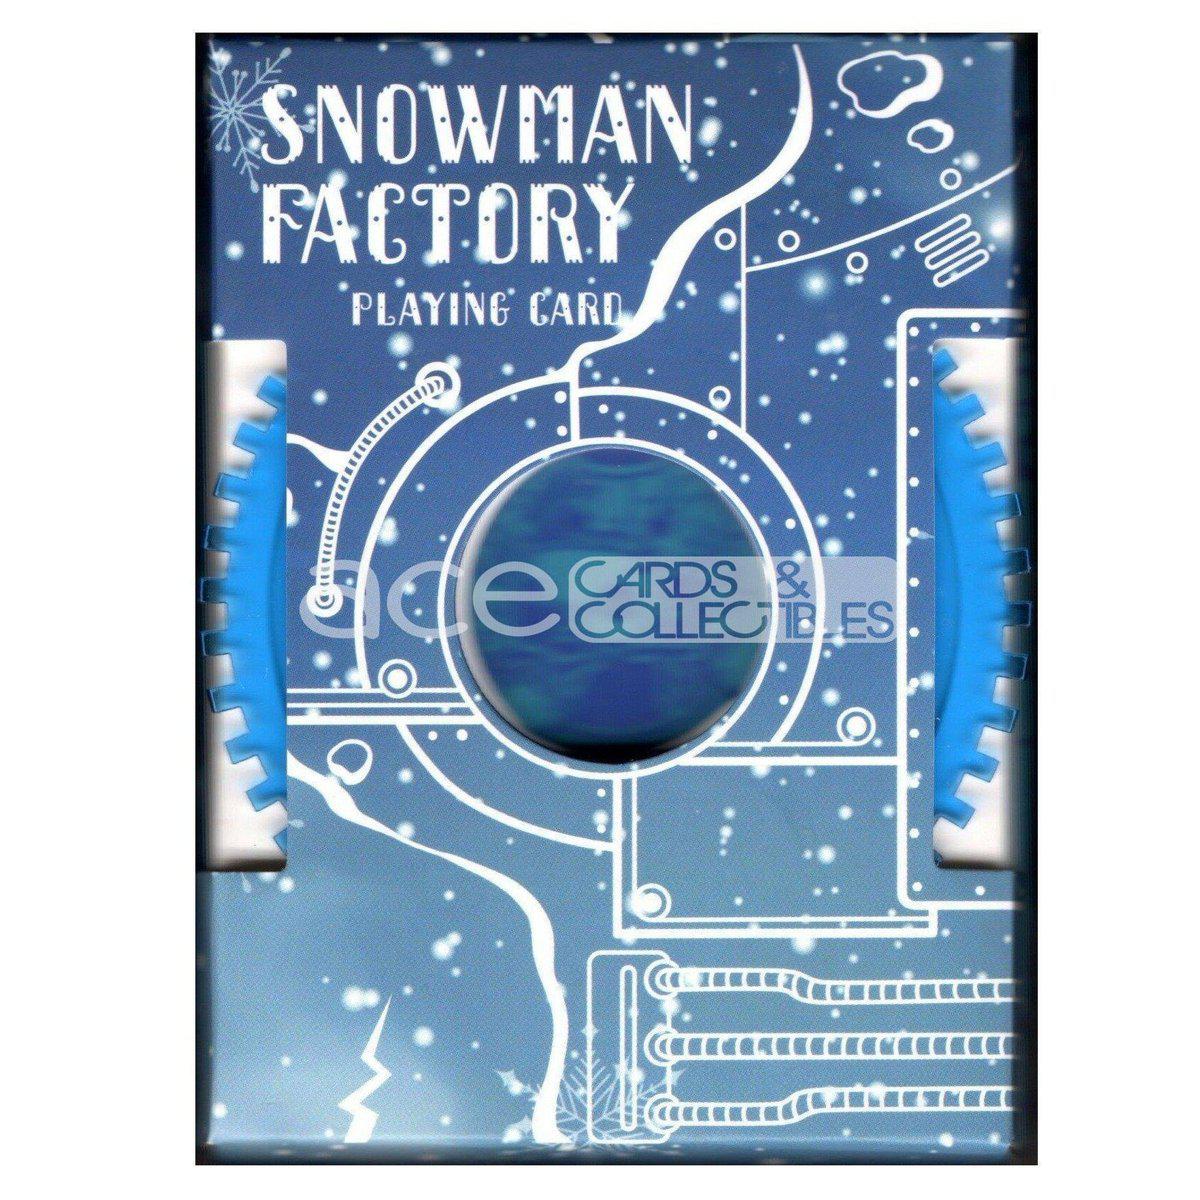 Snowman Factory Playing Cards By Bocopo-United States Playing Cards Company-Ace Cards &amp; Collectibles